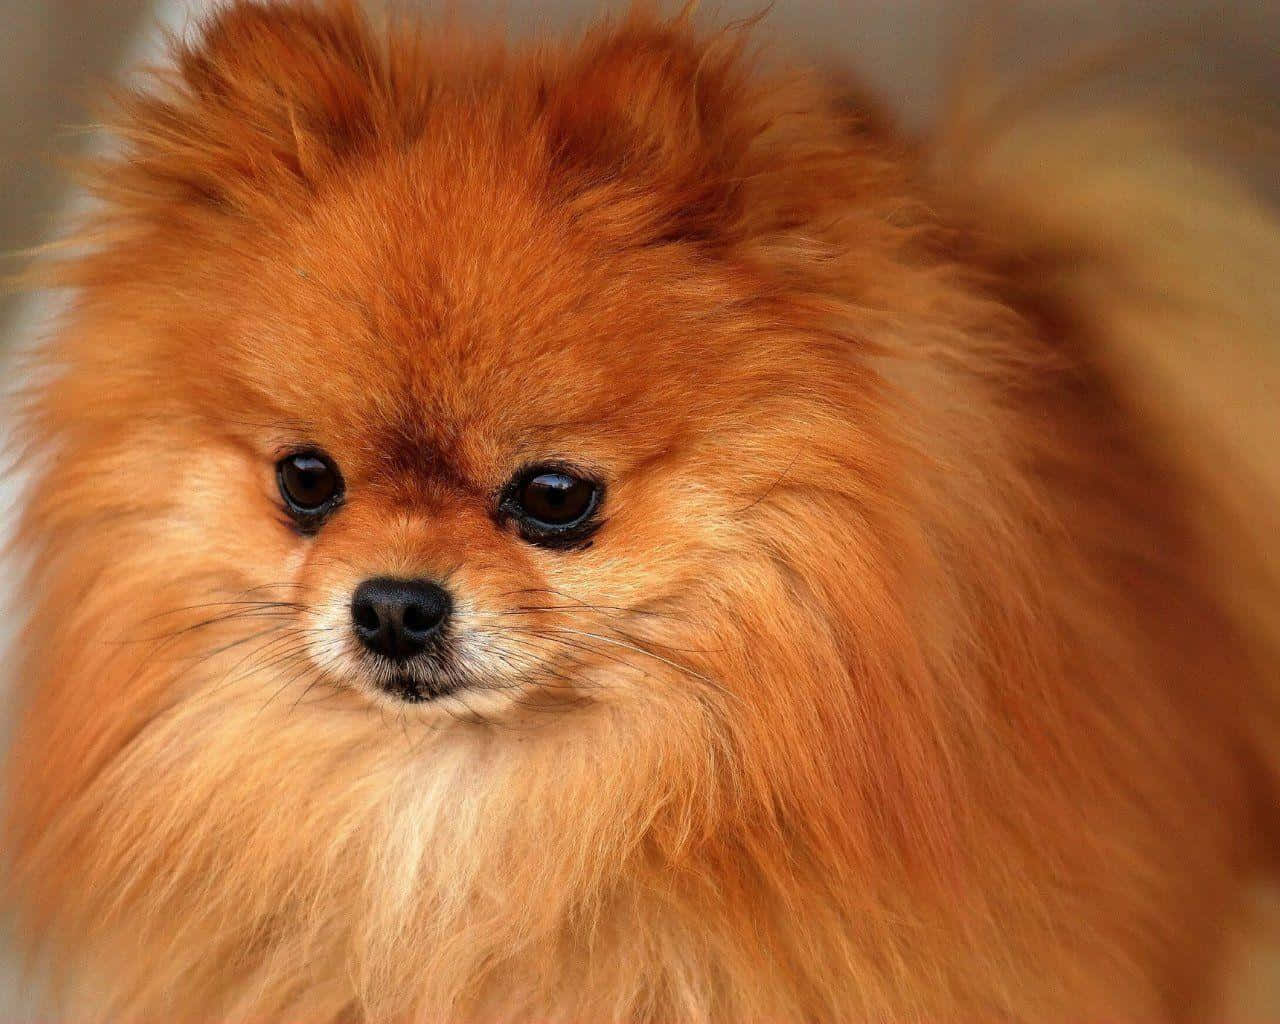 Fluffy Pomeranian Close-Up Picture